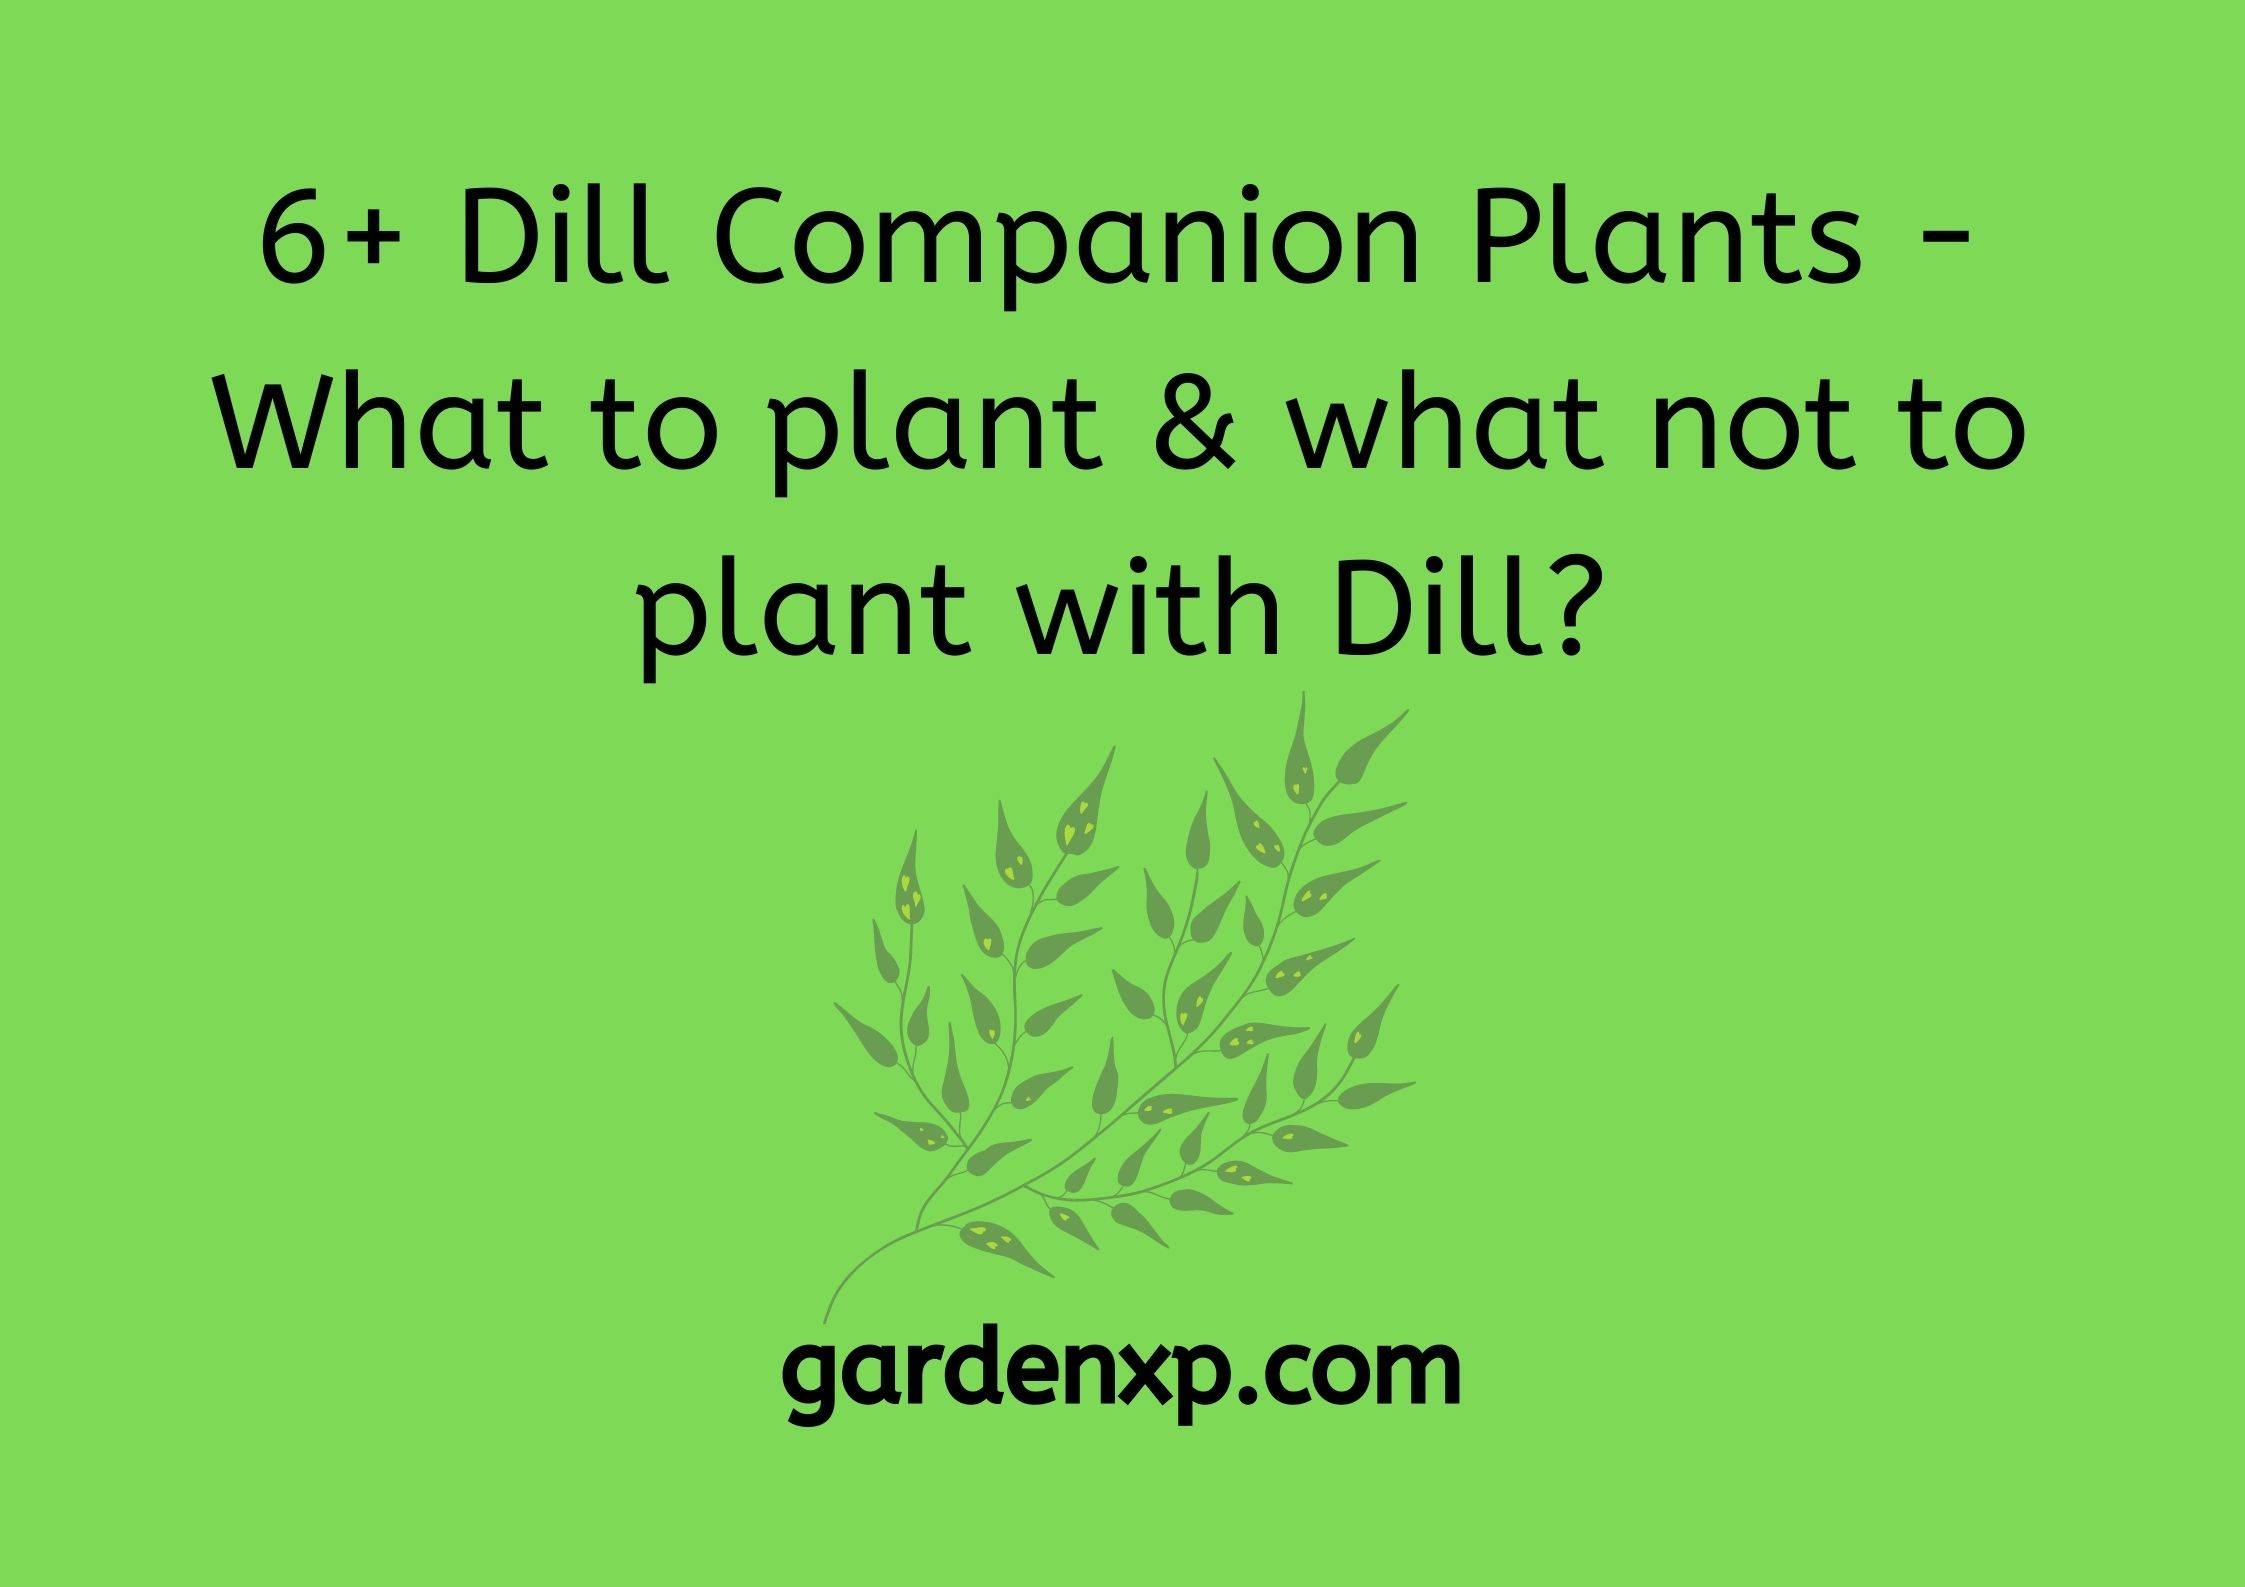 6+ Dill Companion Plants - What to plant & what not to plant with Dill?